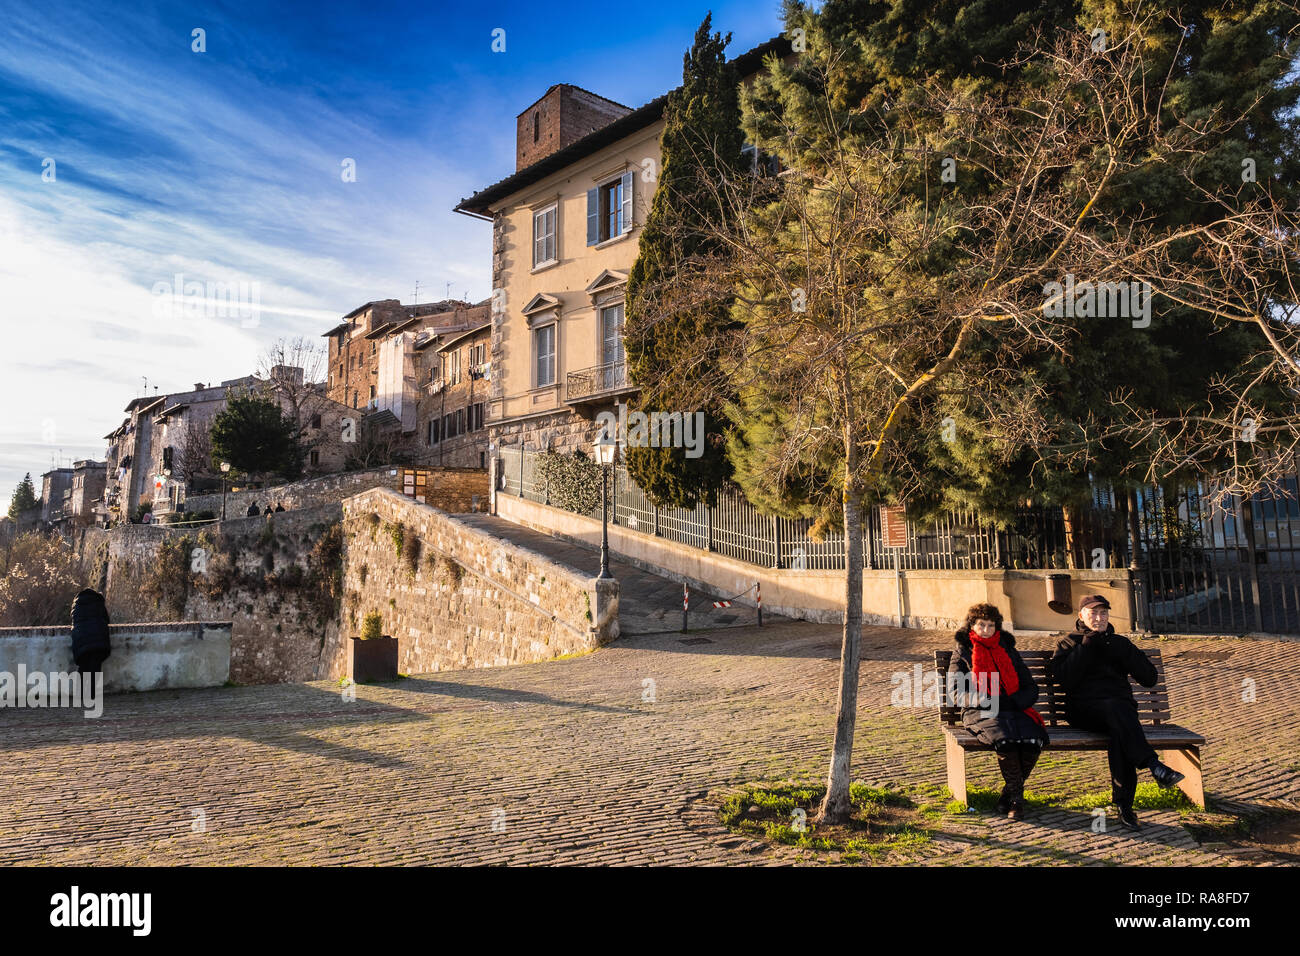 COLLE VAL D’ELSA, ITALY - DECEMBER 26, 2018: Two unknown people in the Baluardi. Panoramic view of the city in the historic center of Colle di Val d'E Stock Photo